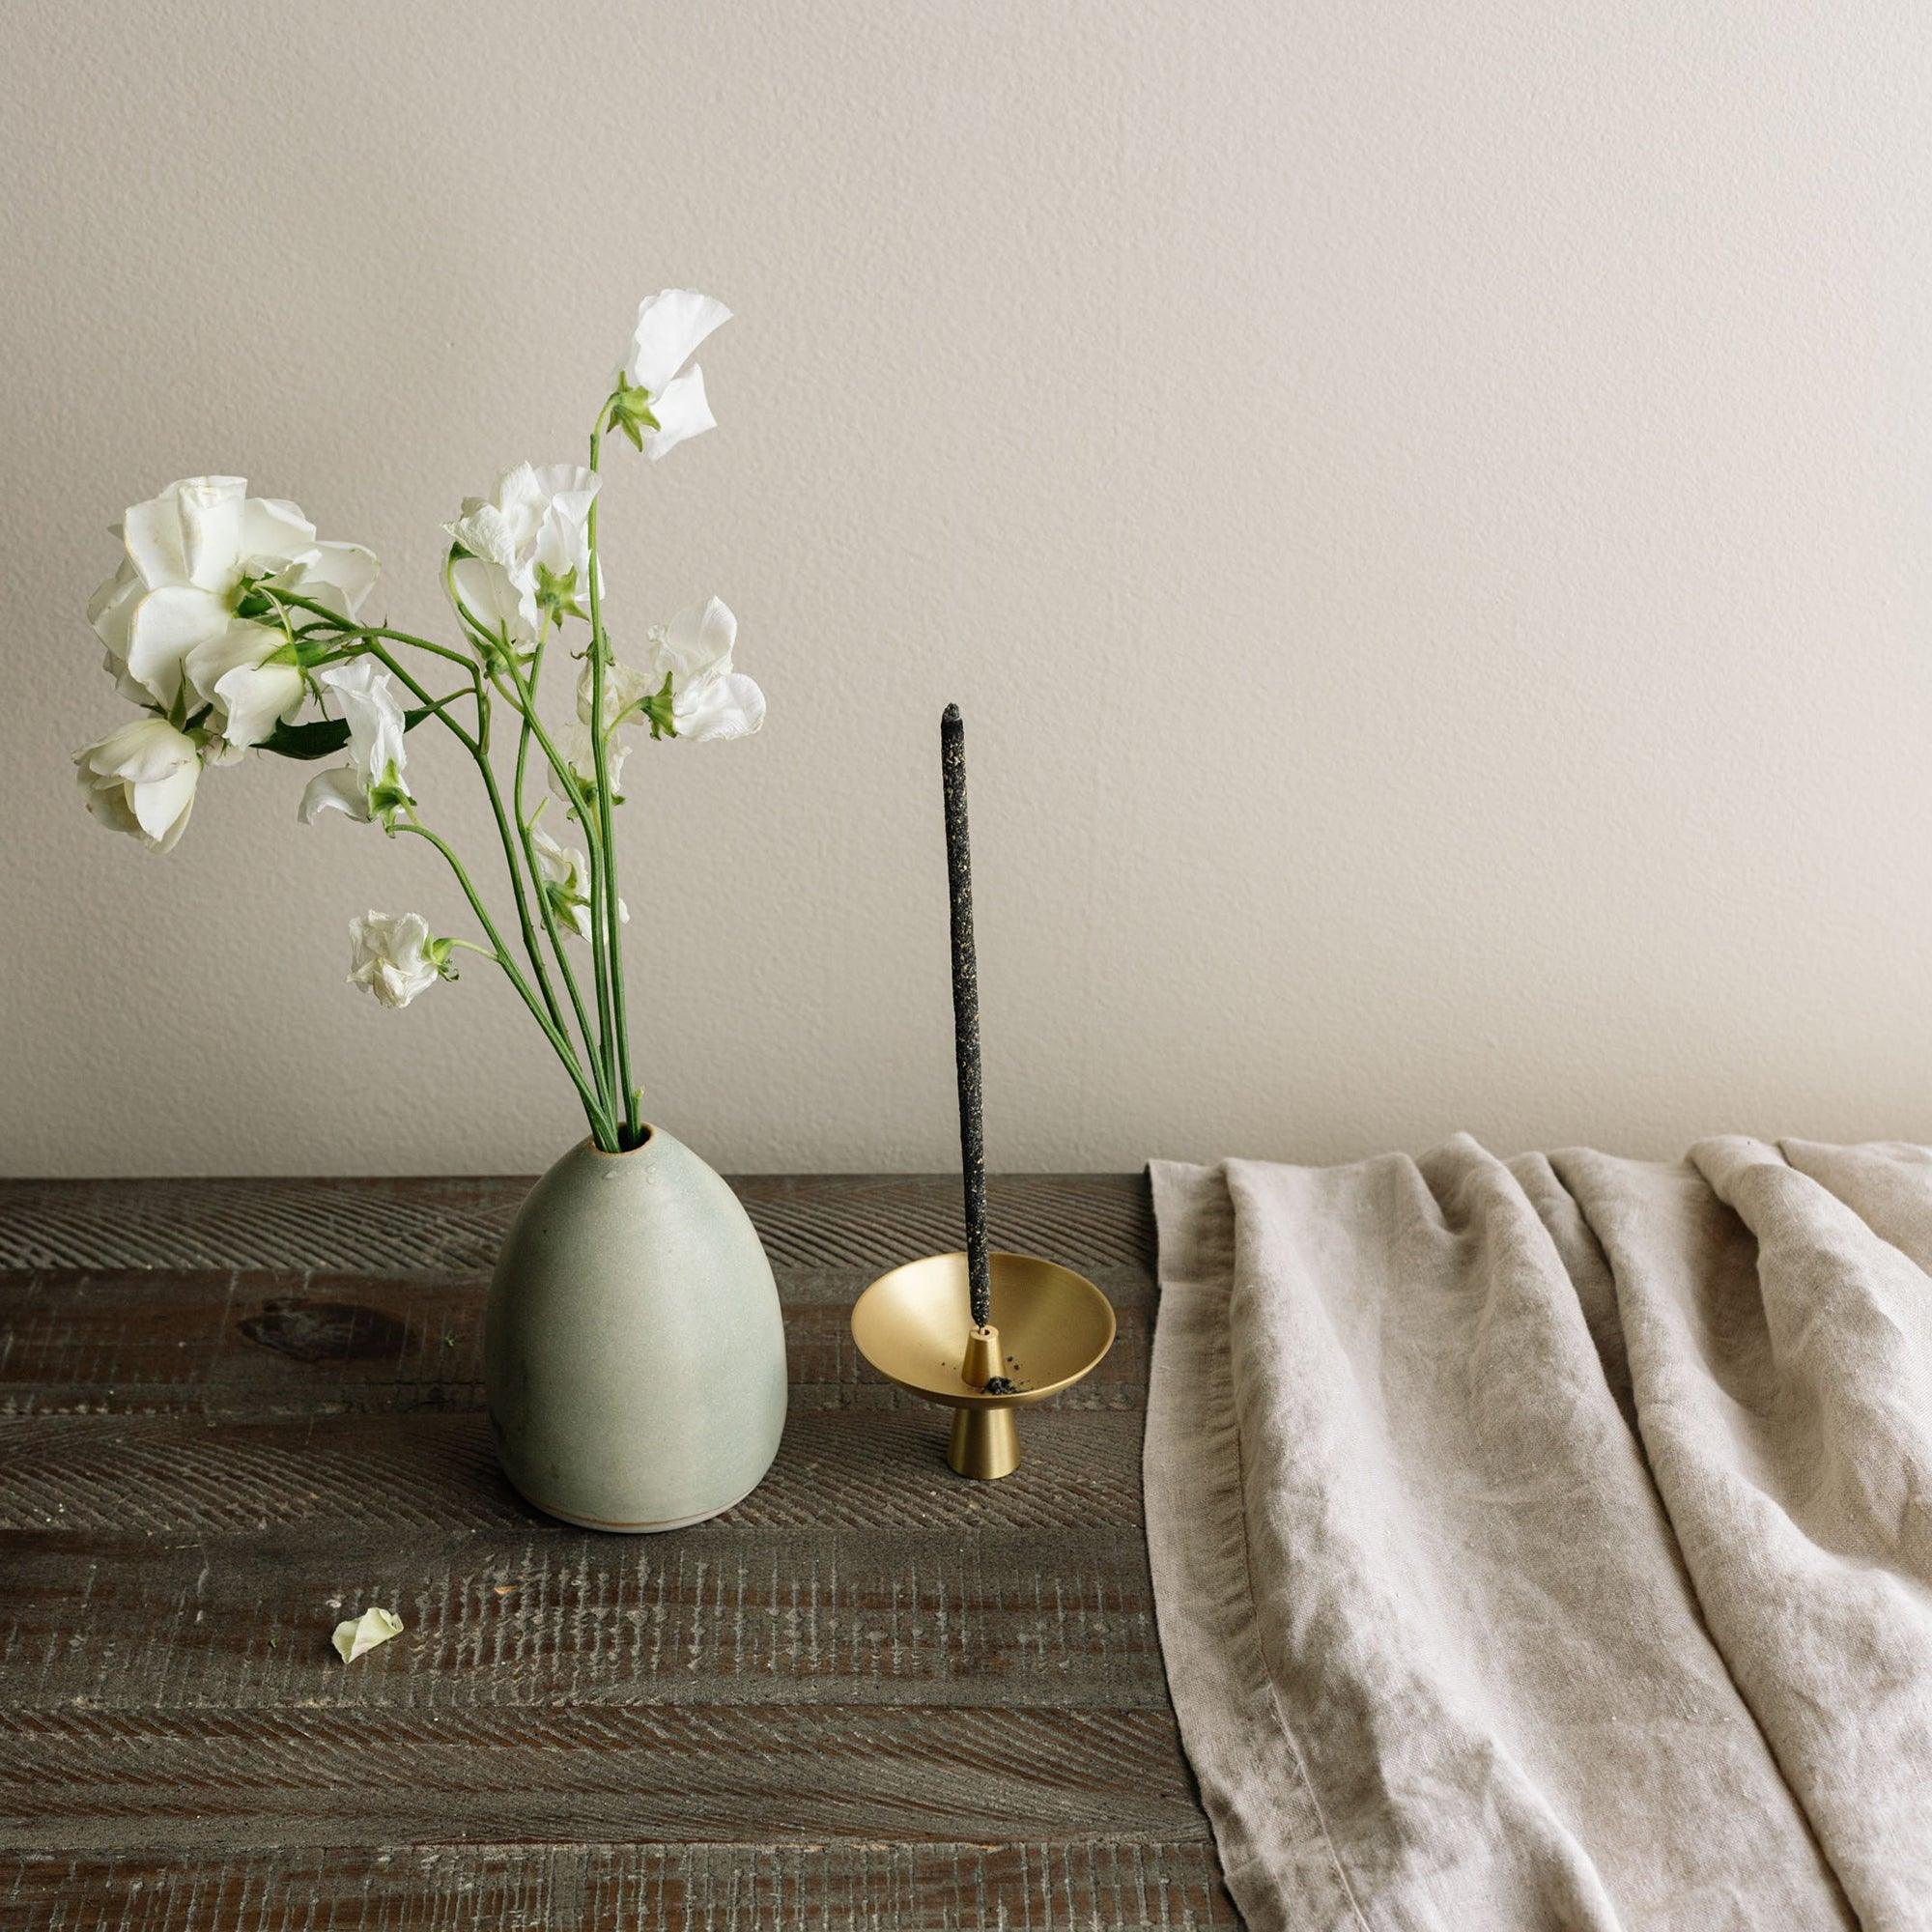 flower vase,  brass ash catcher with an incense holder, linen cloth on the wooden table